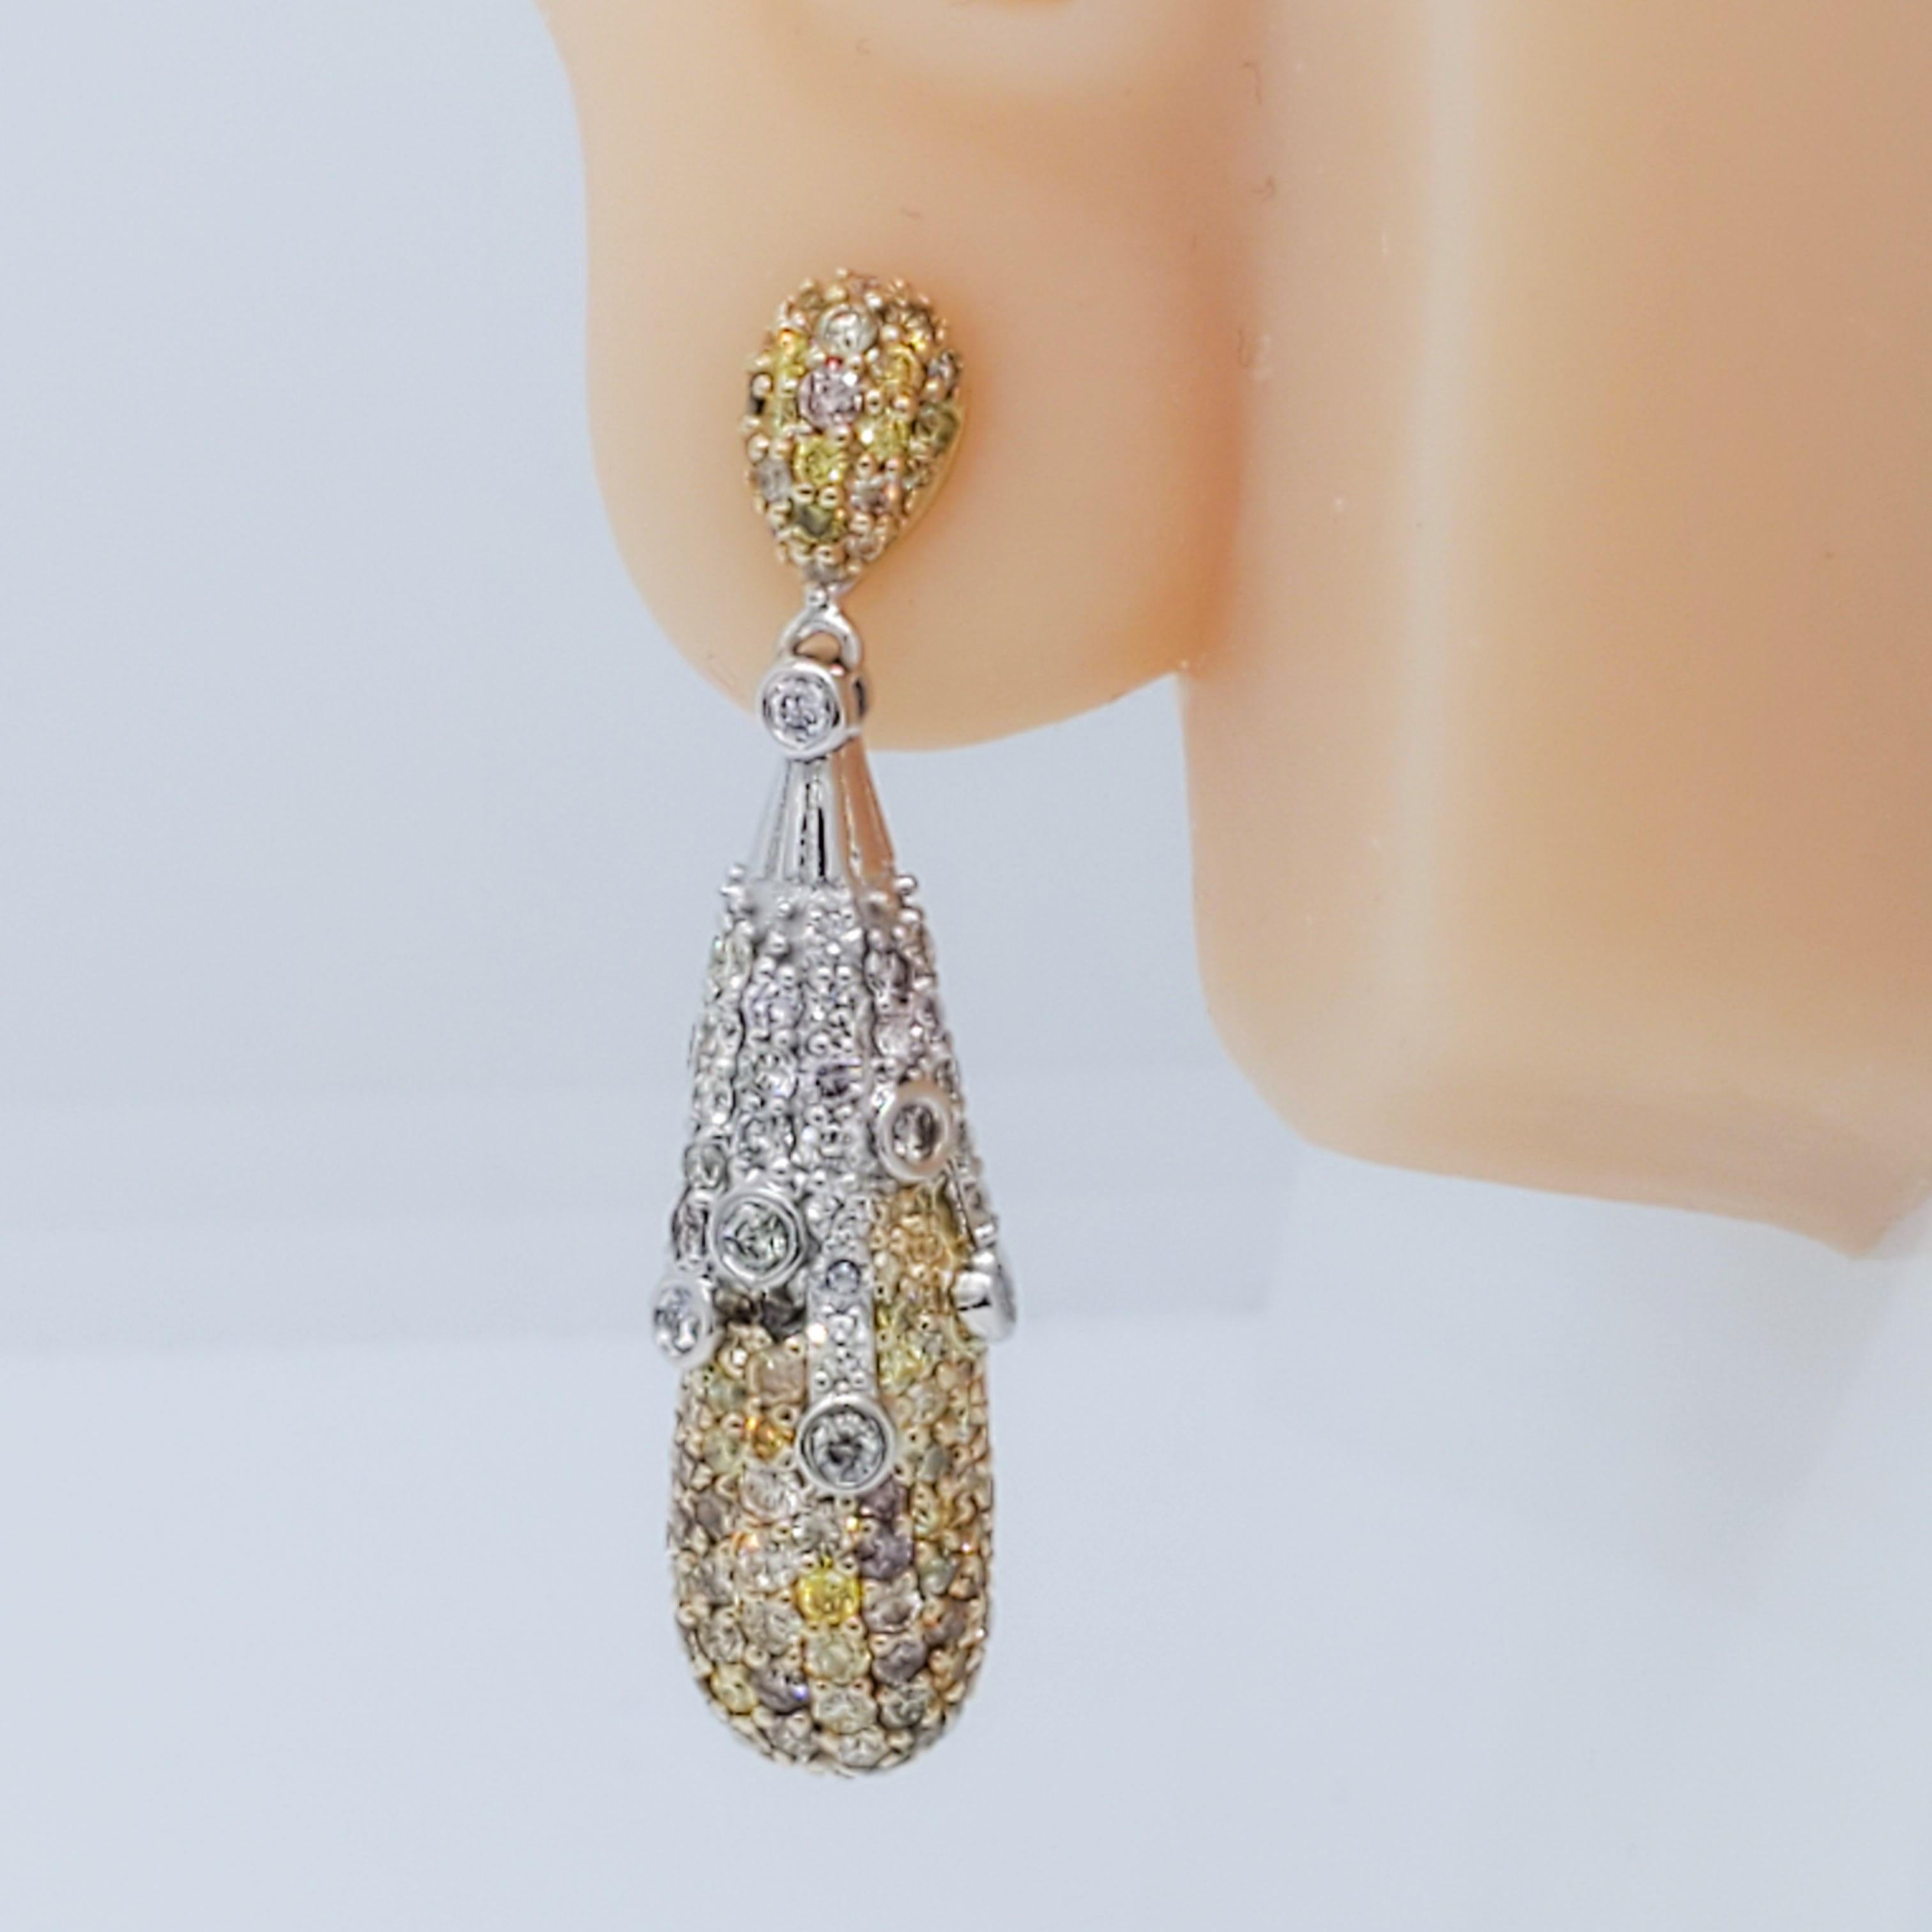 Beautiful dangle day and night earrings with 4.35 ct. good quality white diamond and yellow diamond rounds.  Both sides are not identical, they are opposite, making them day and night earrings.  Handmade in 14k white and yellow gold.  